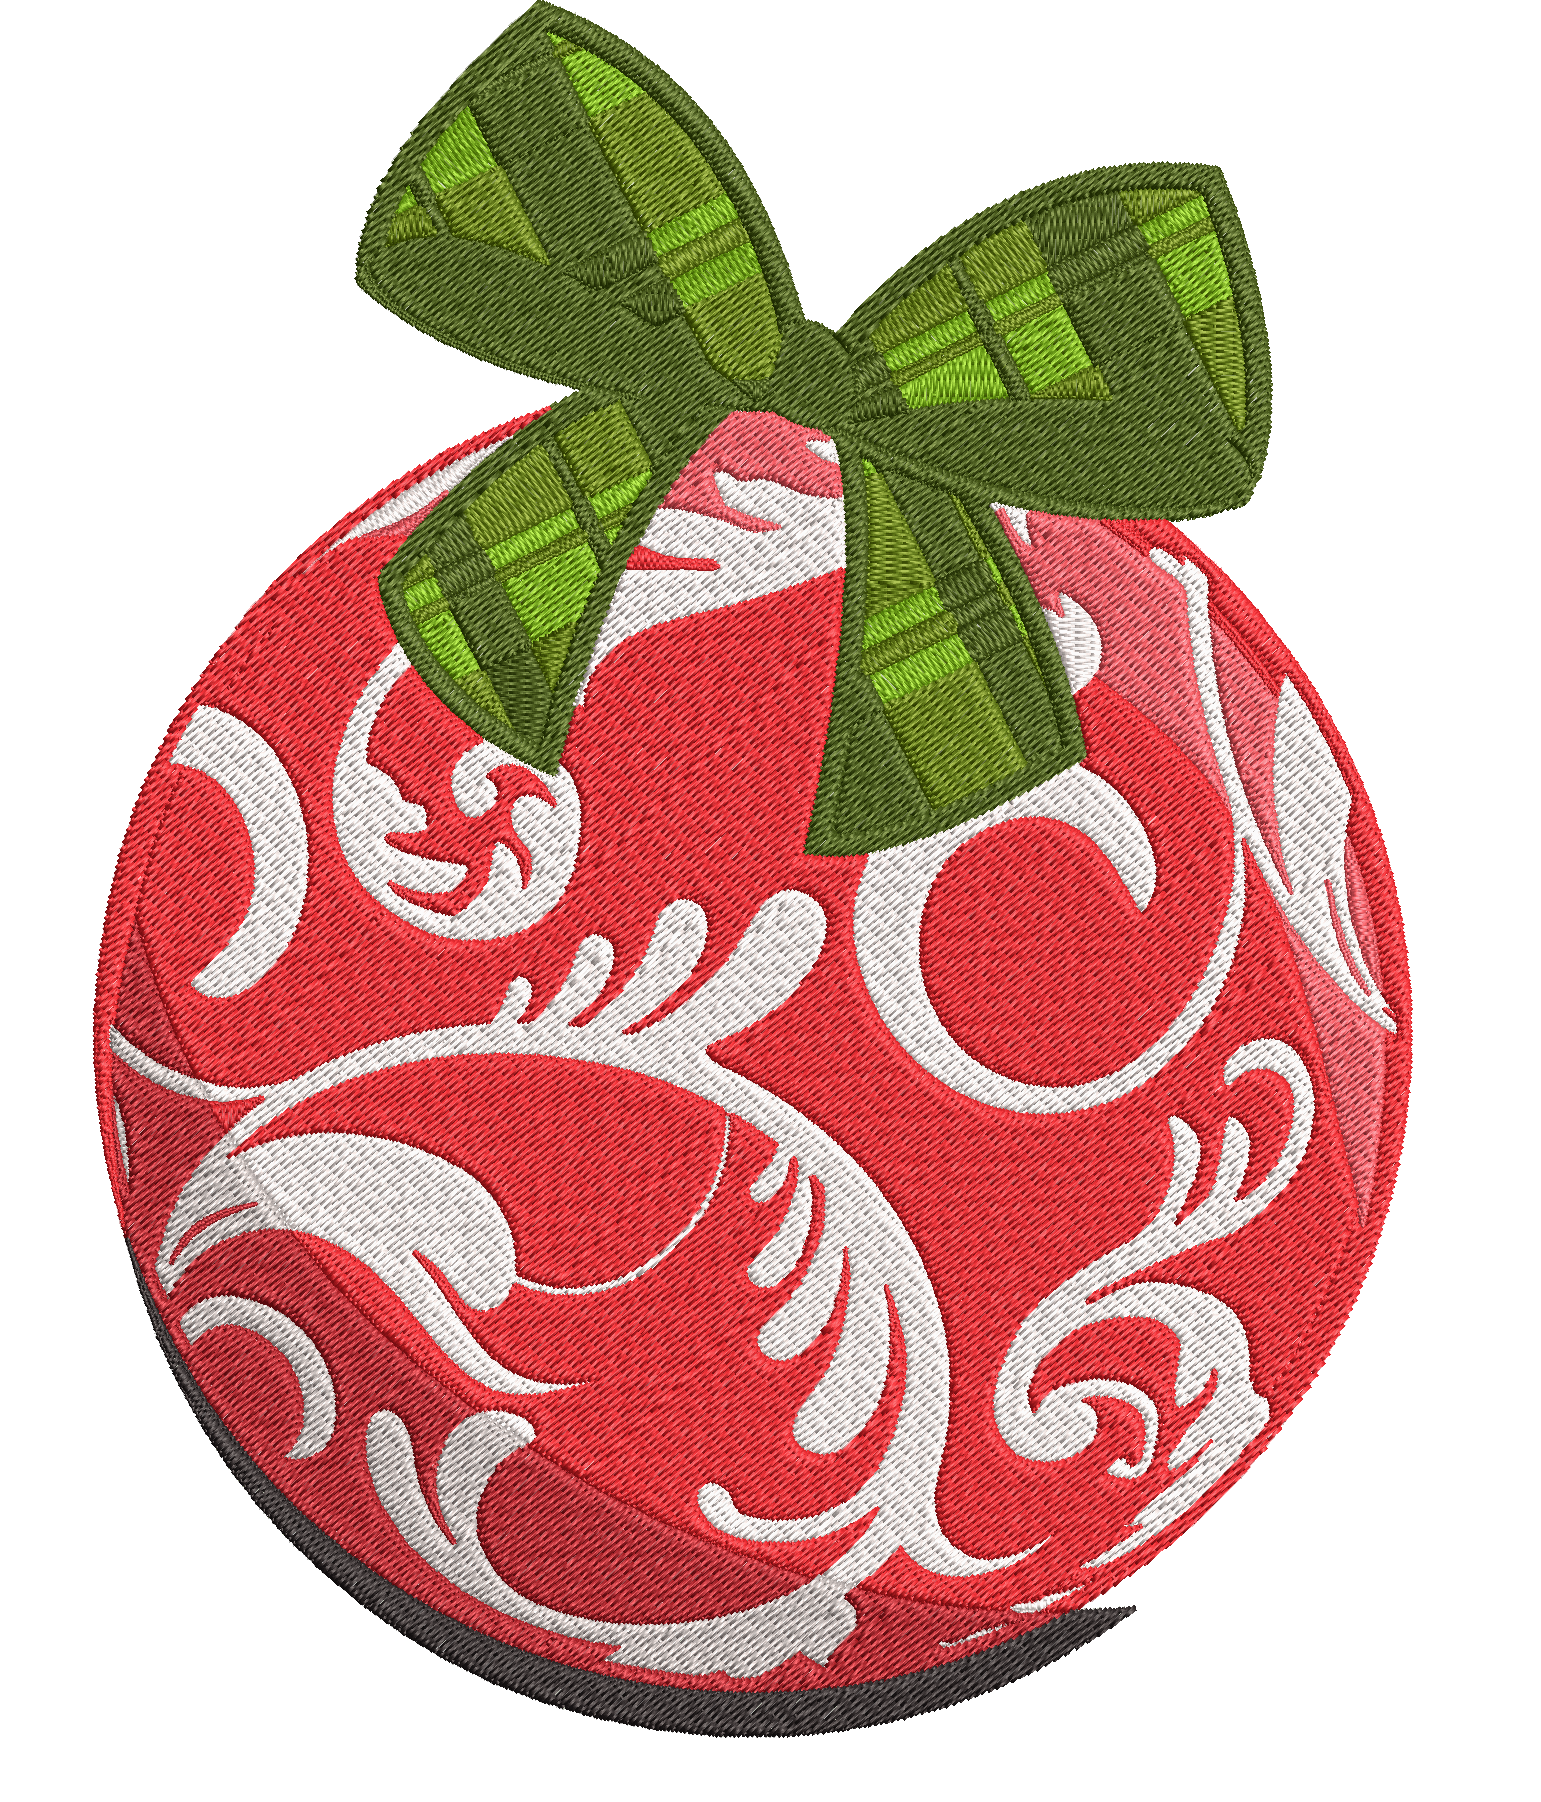 Christmas Ornaments - Designs Pack 3 : Embroidery Design - FineryEmbroidery